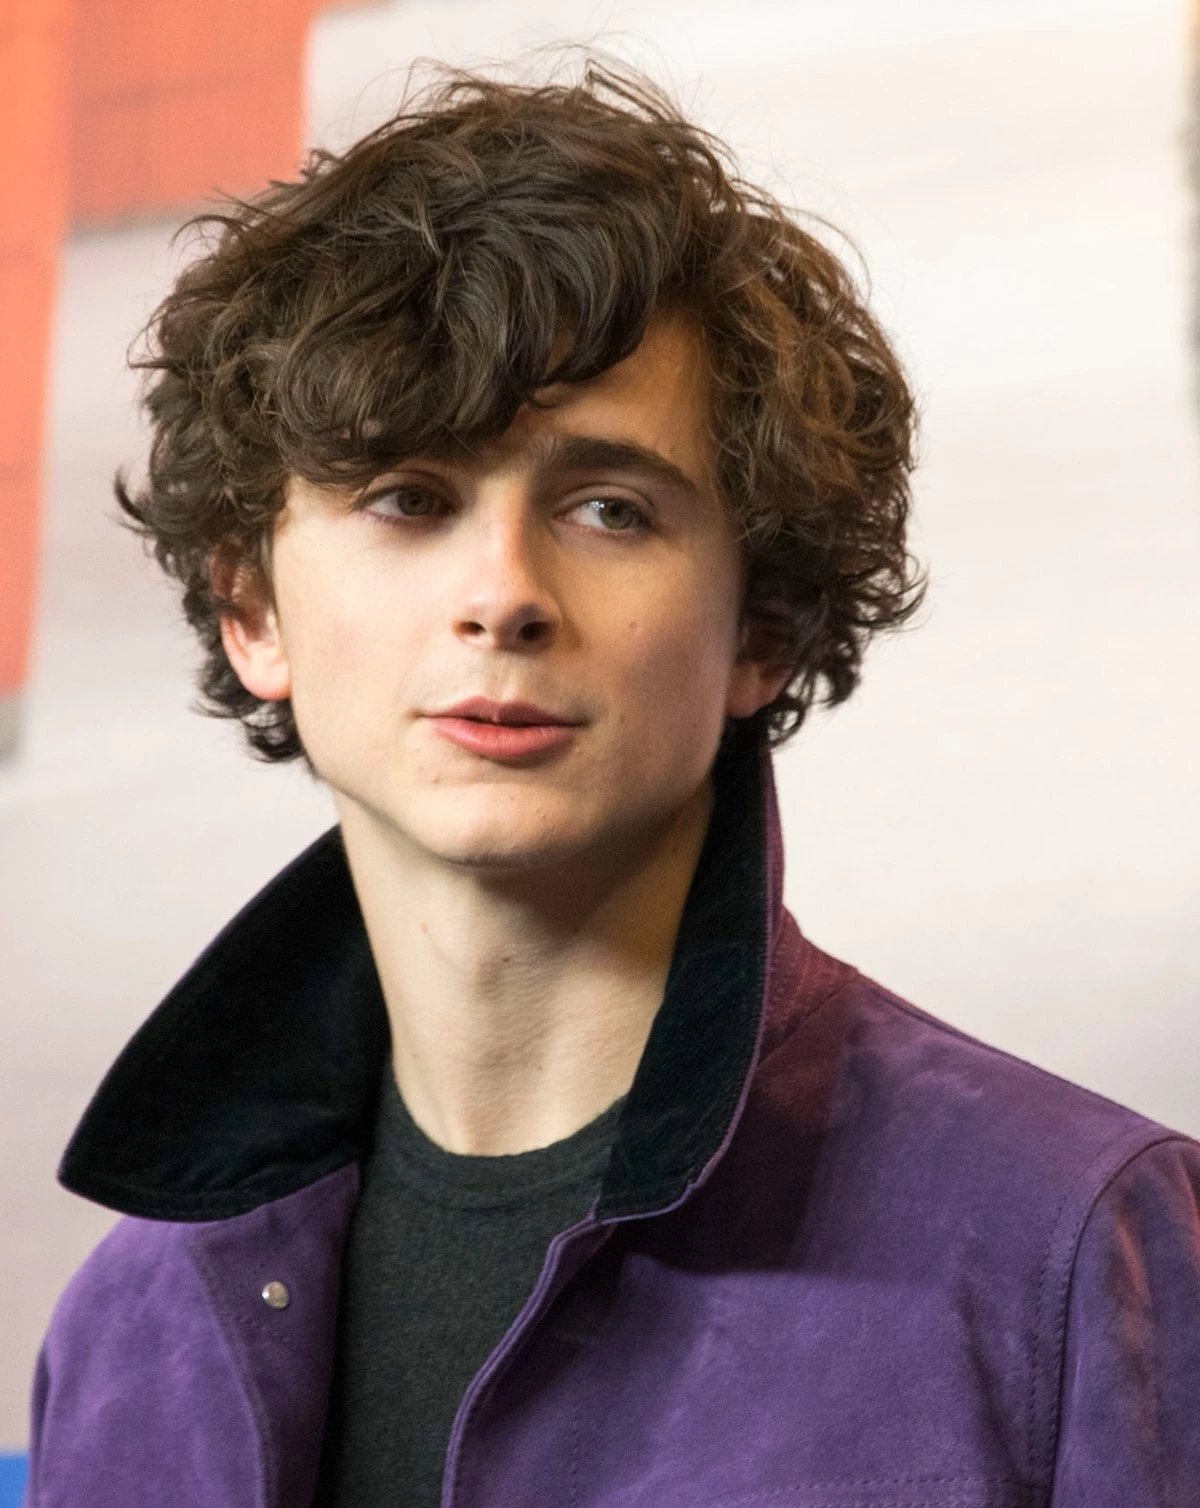 Timothée Chalamet dropped out of Columbia University